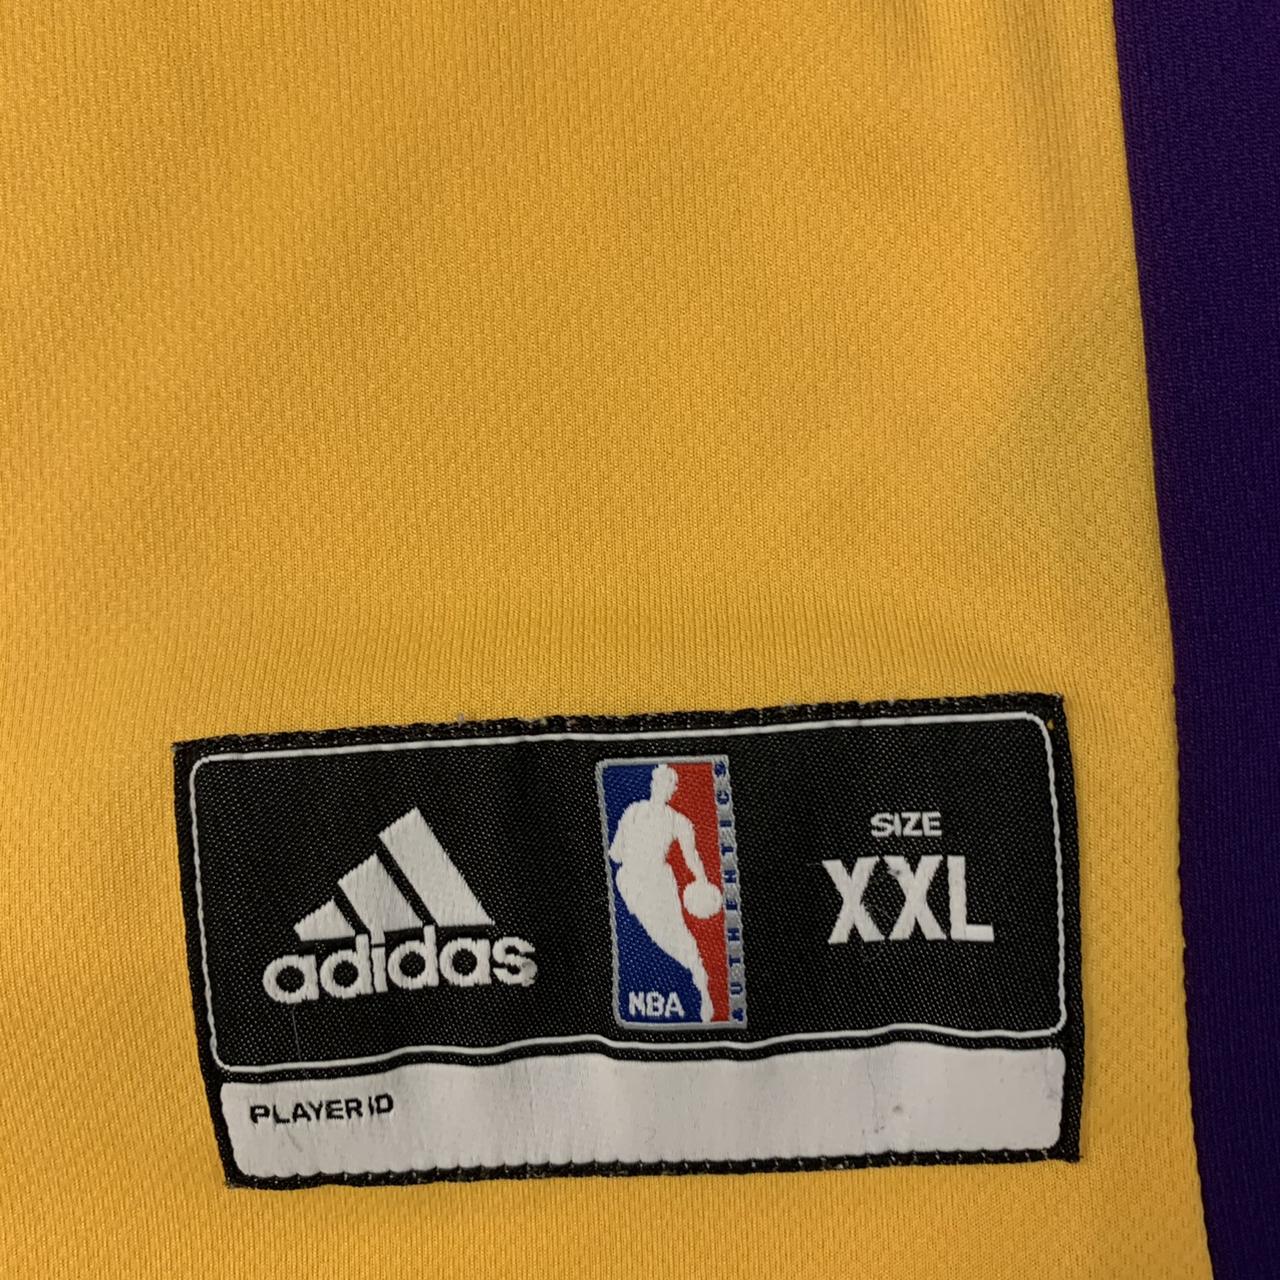 Real authentic Lakers adidas 24 Kobe Bryant Jersey - Depop